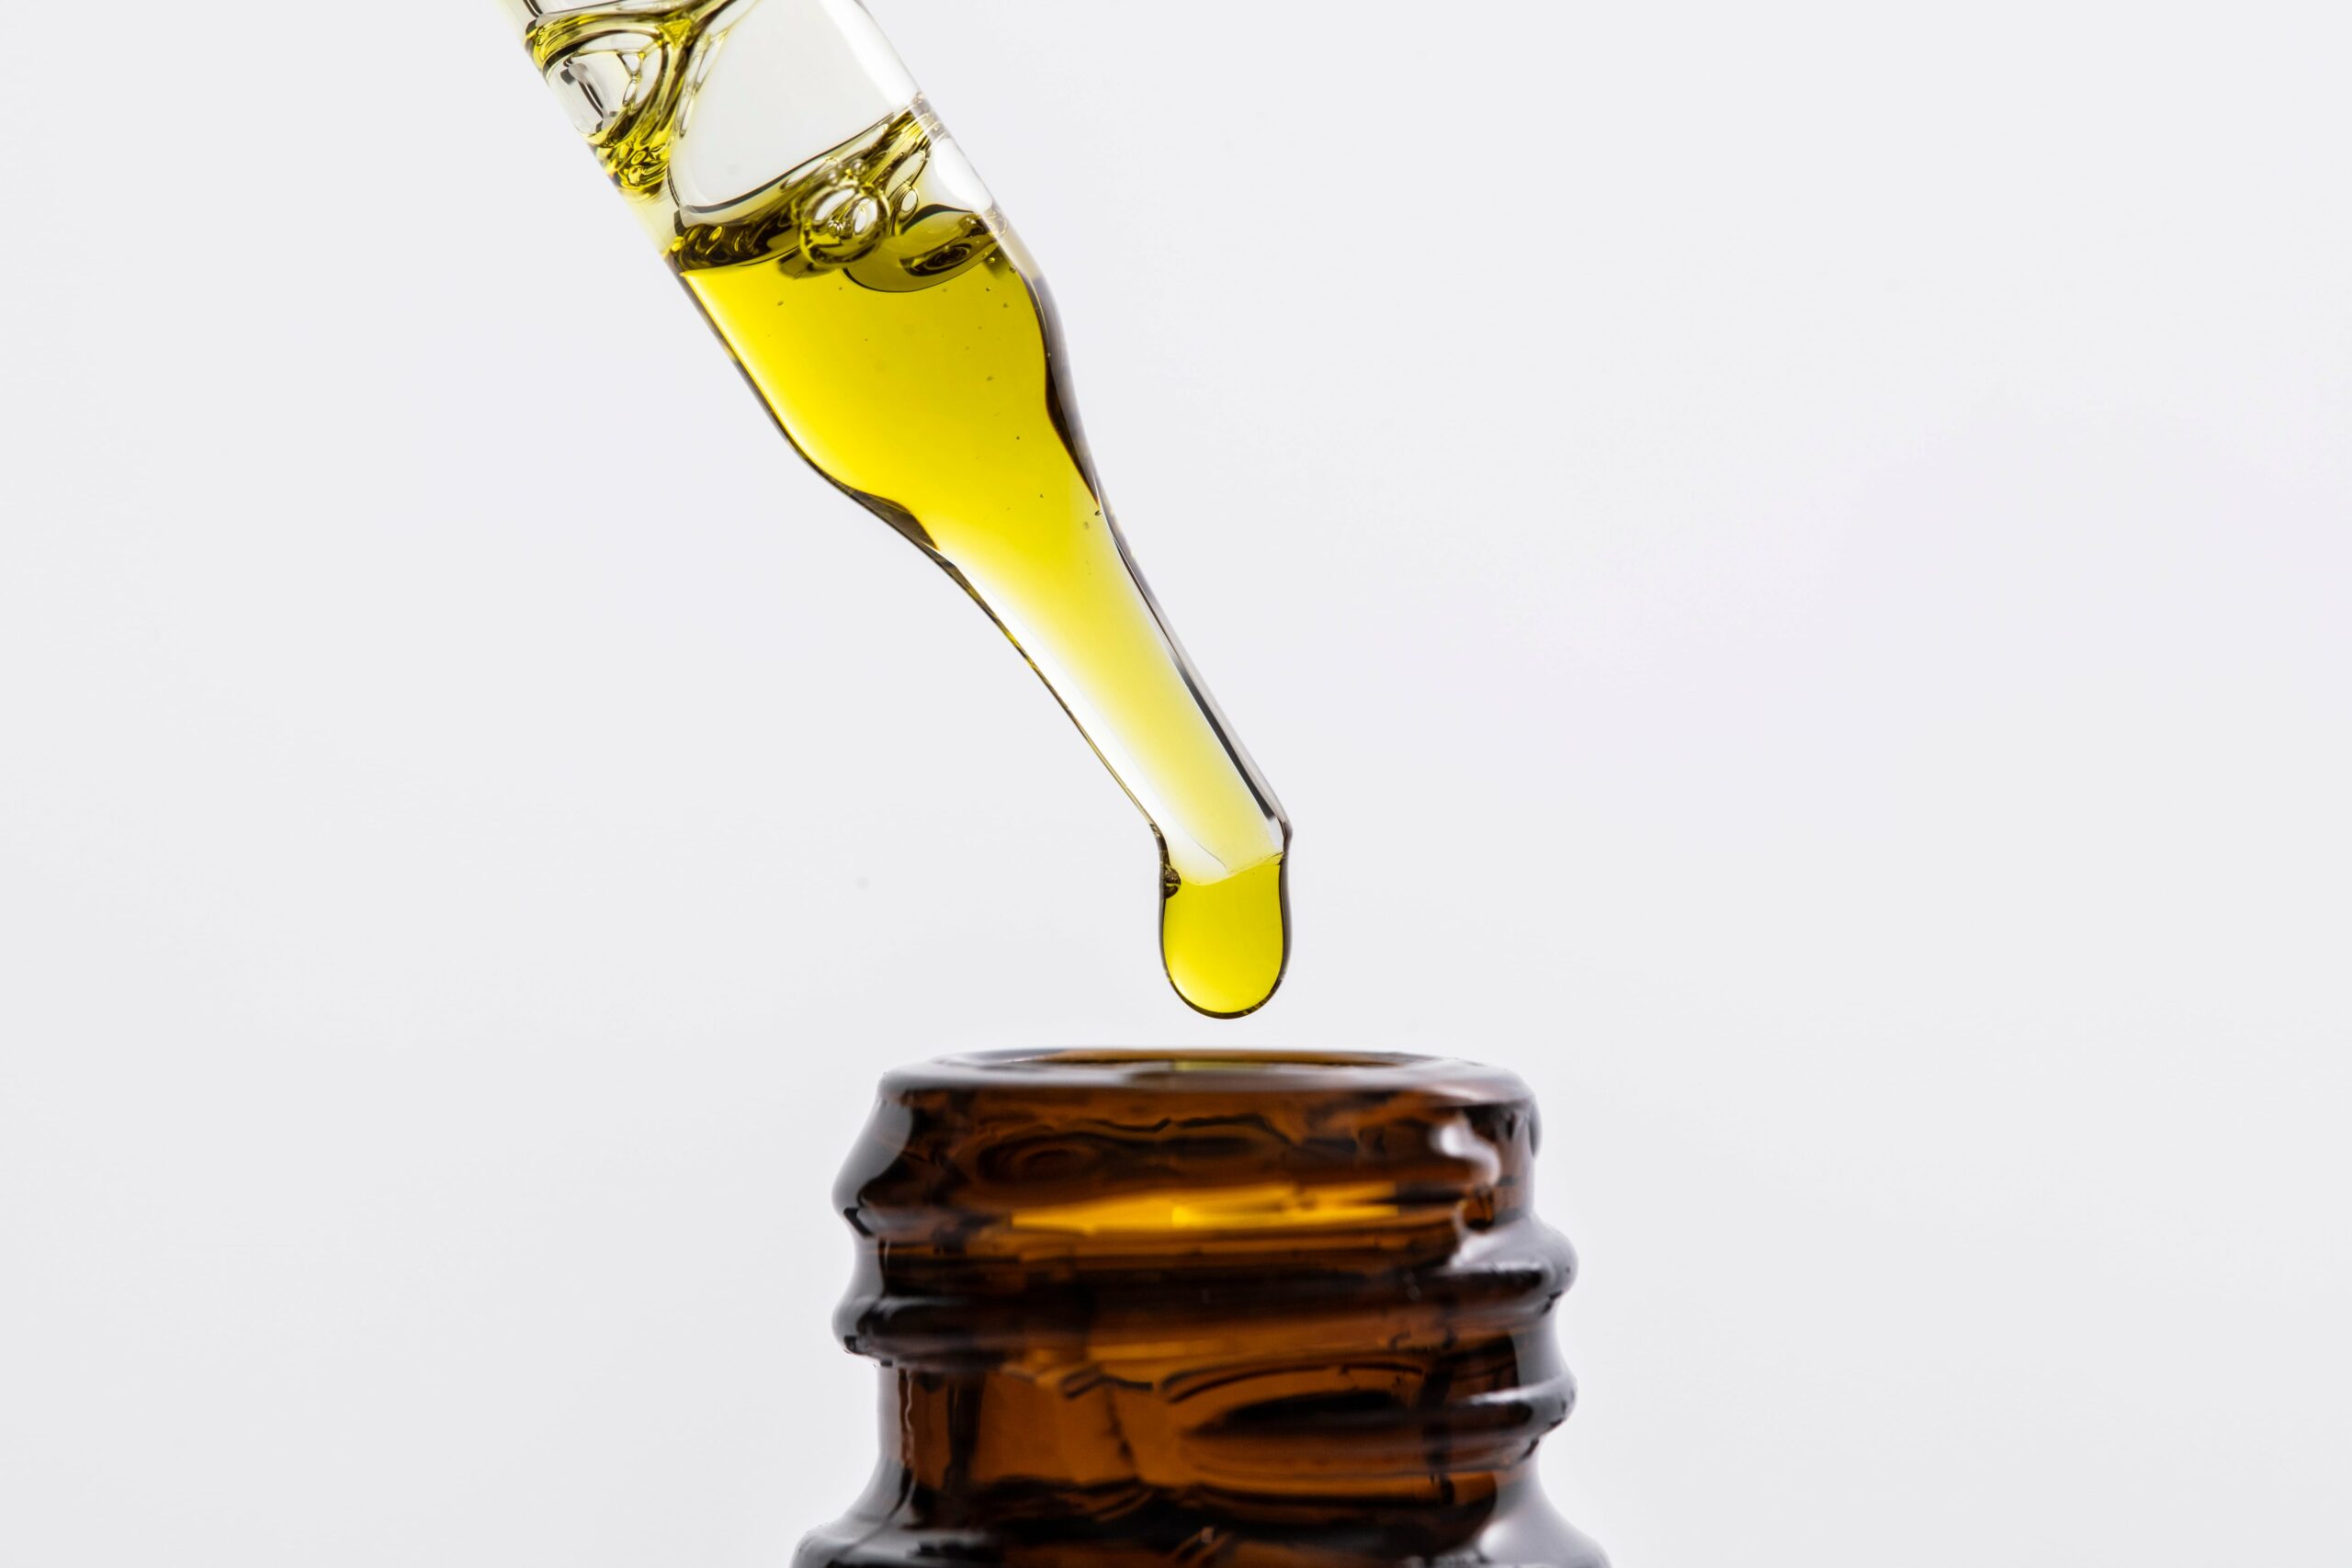 Full-Spectrum CBD Oil Tinctures: Benefits, Uses, and Details